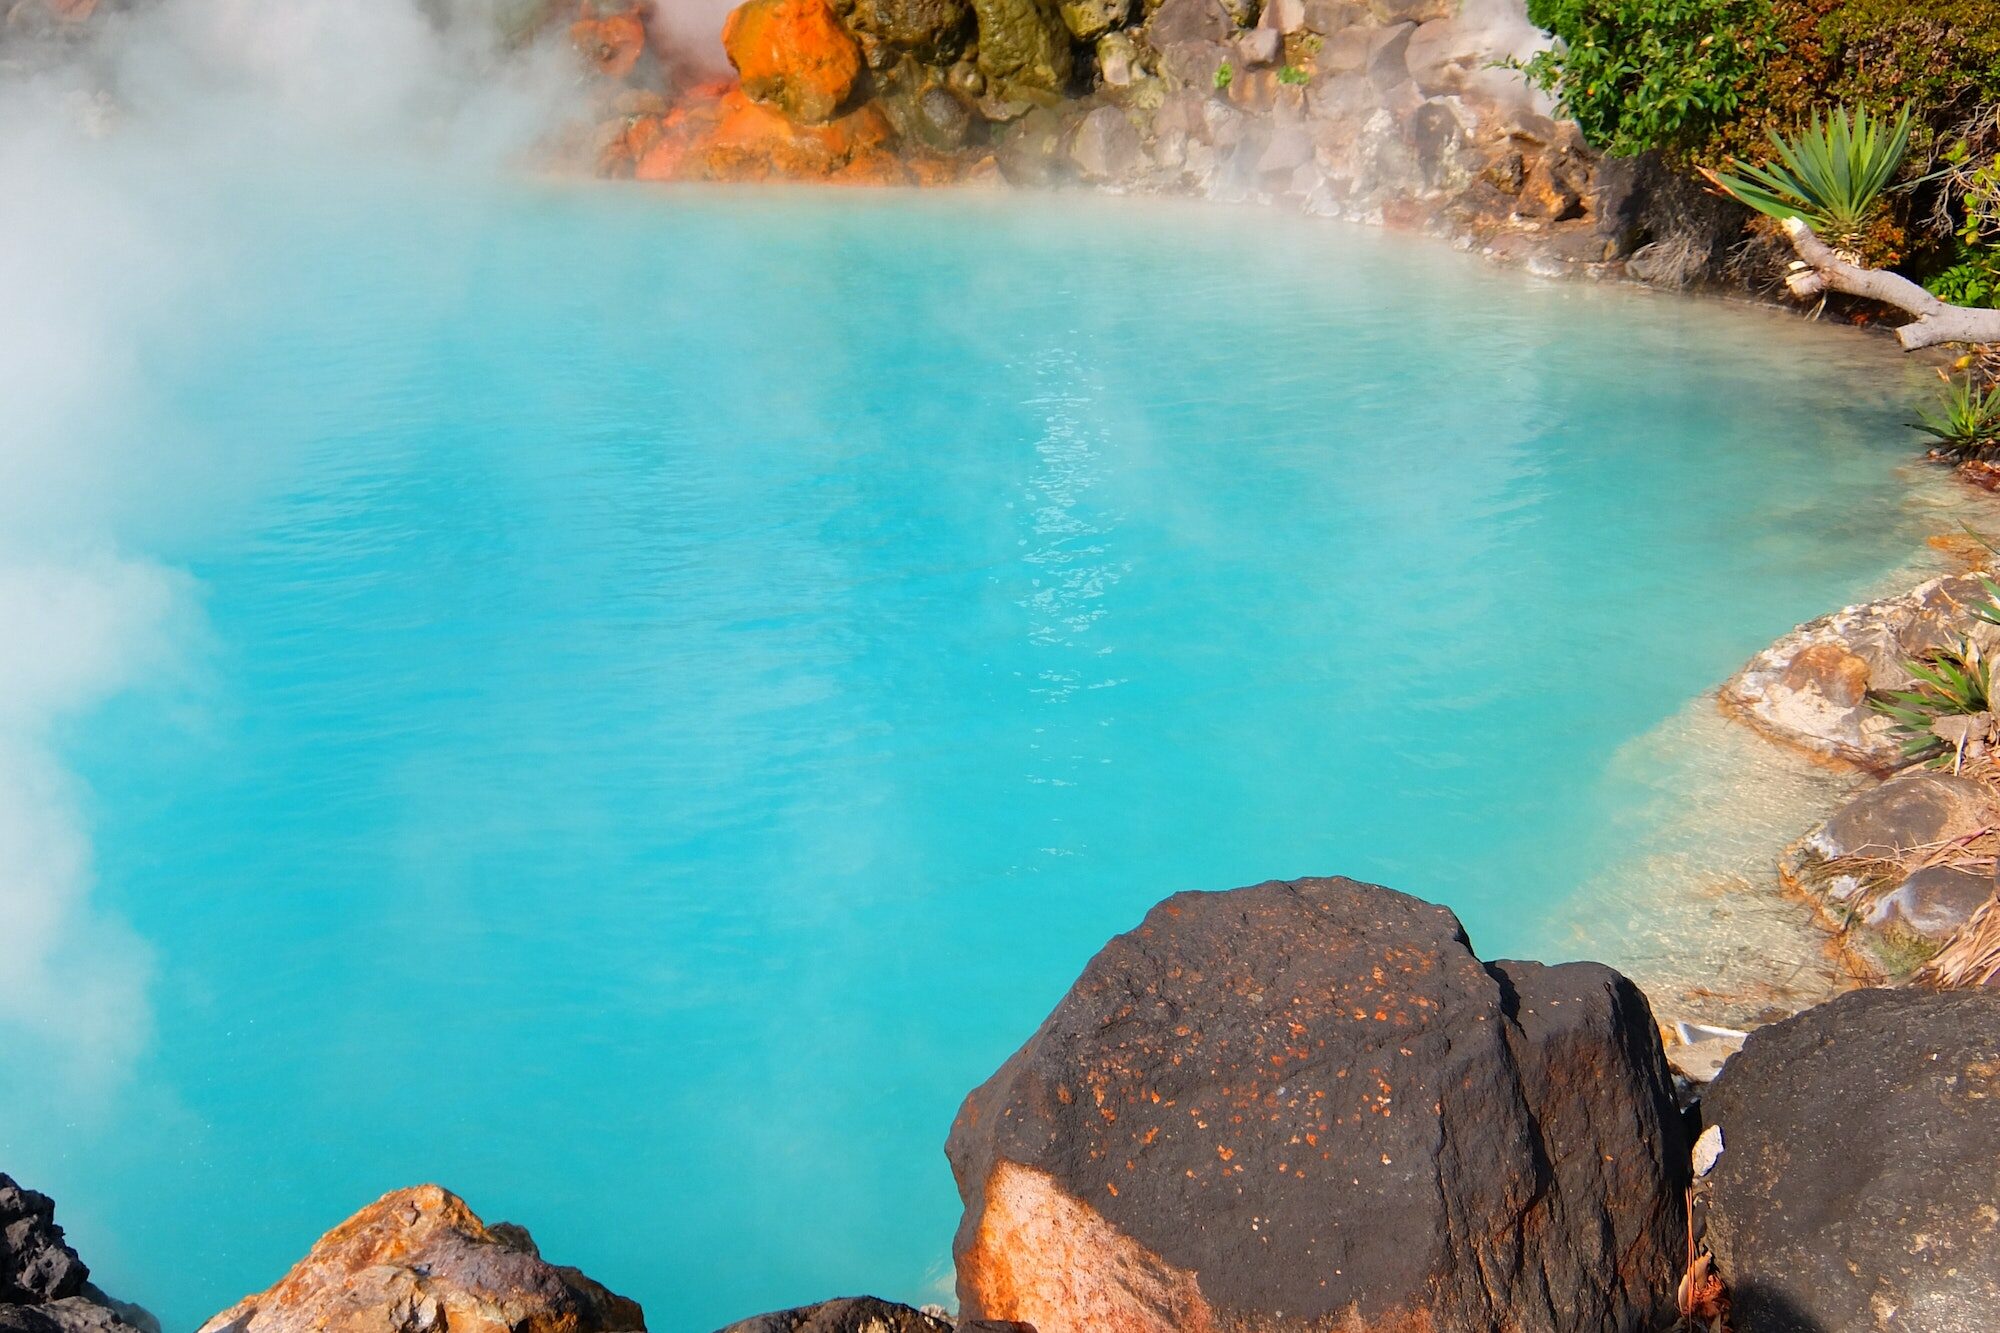 Lava rocks beside turquoise color hot spring